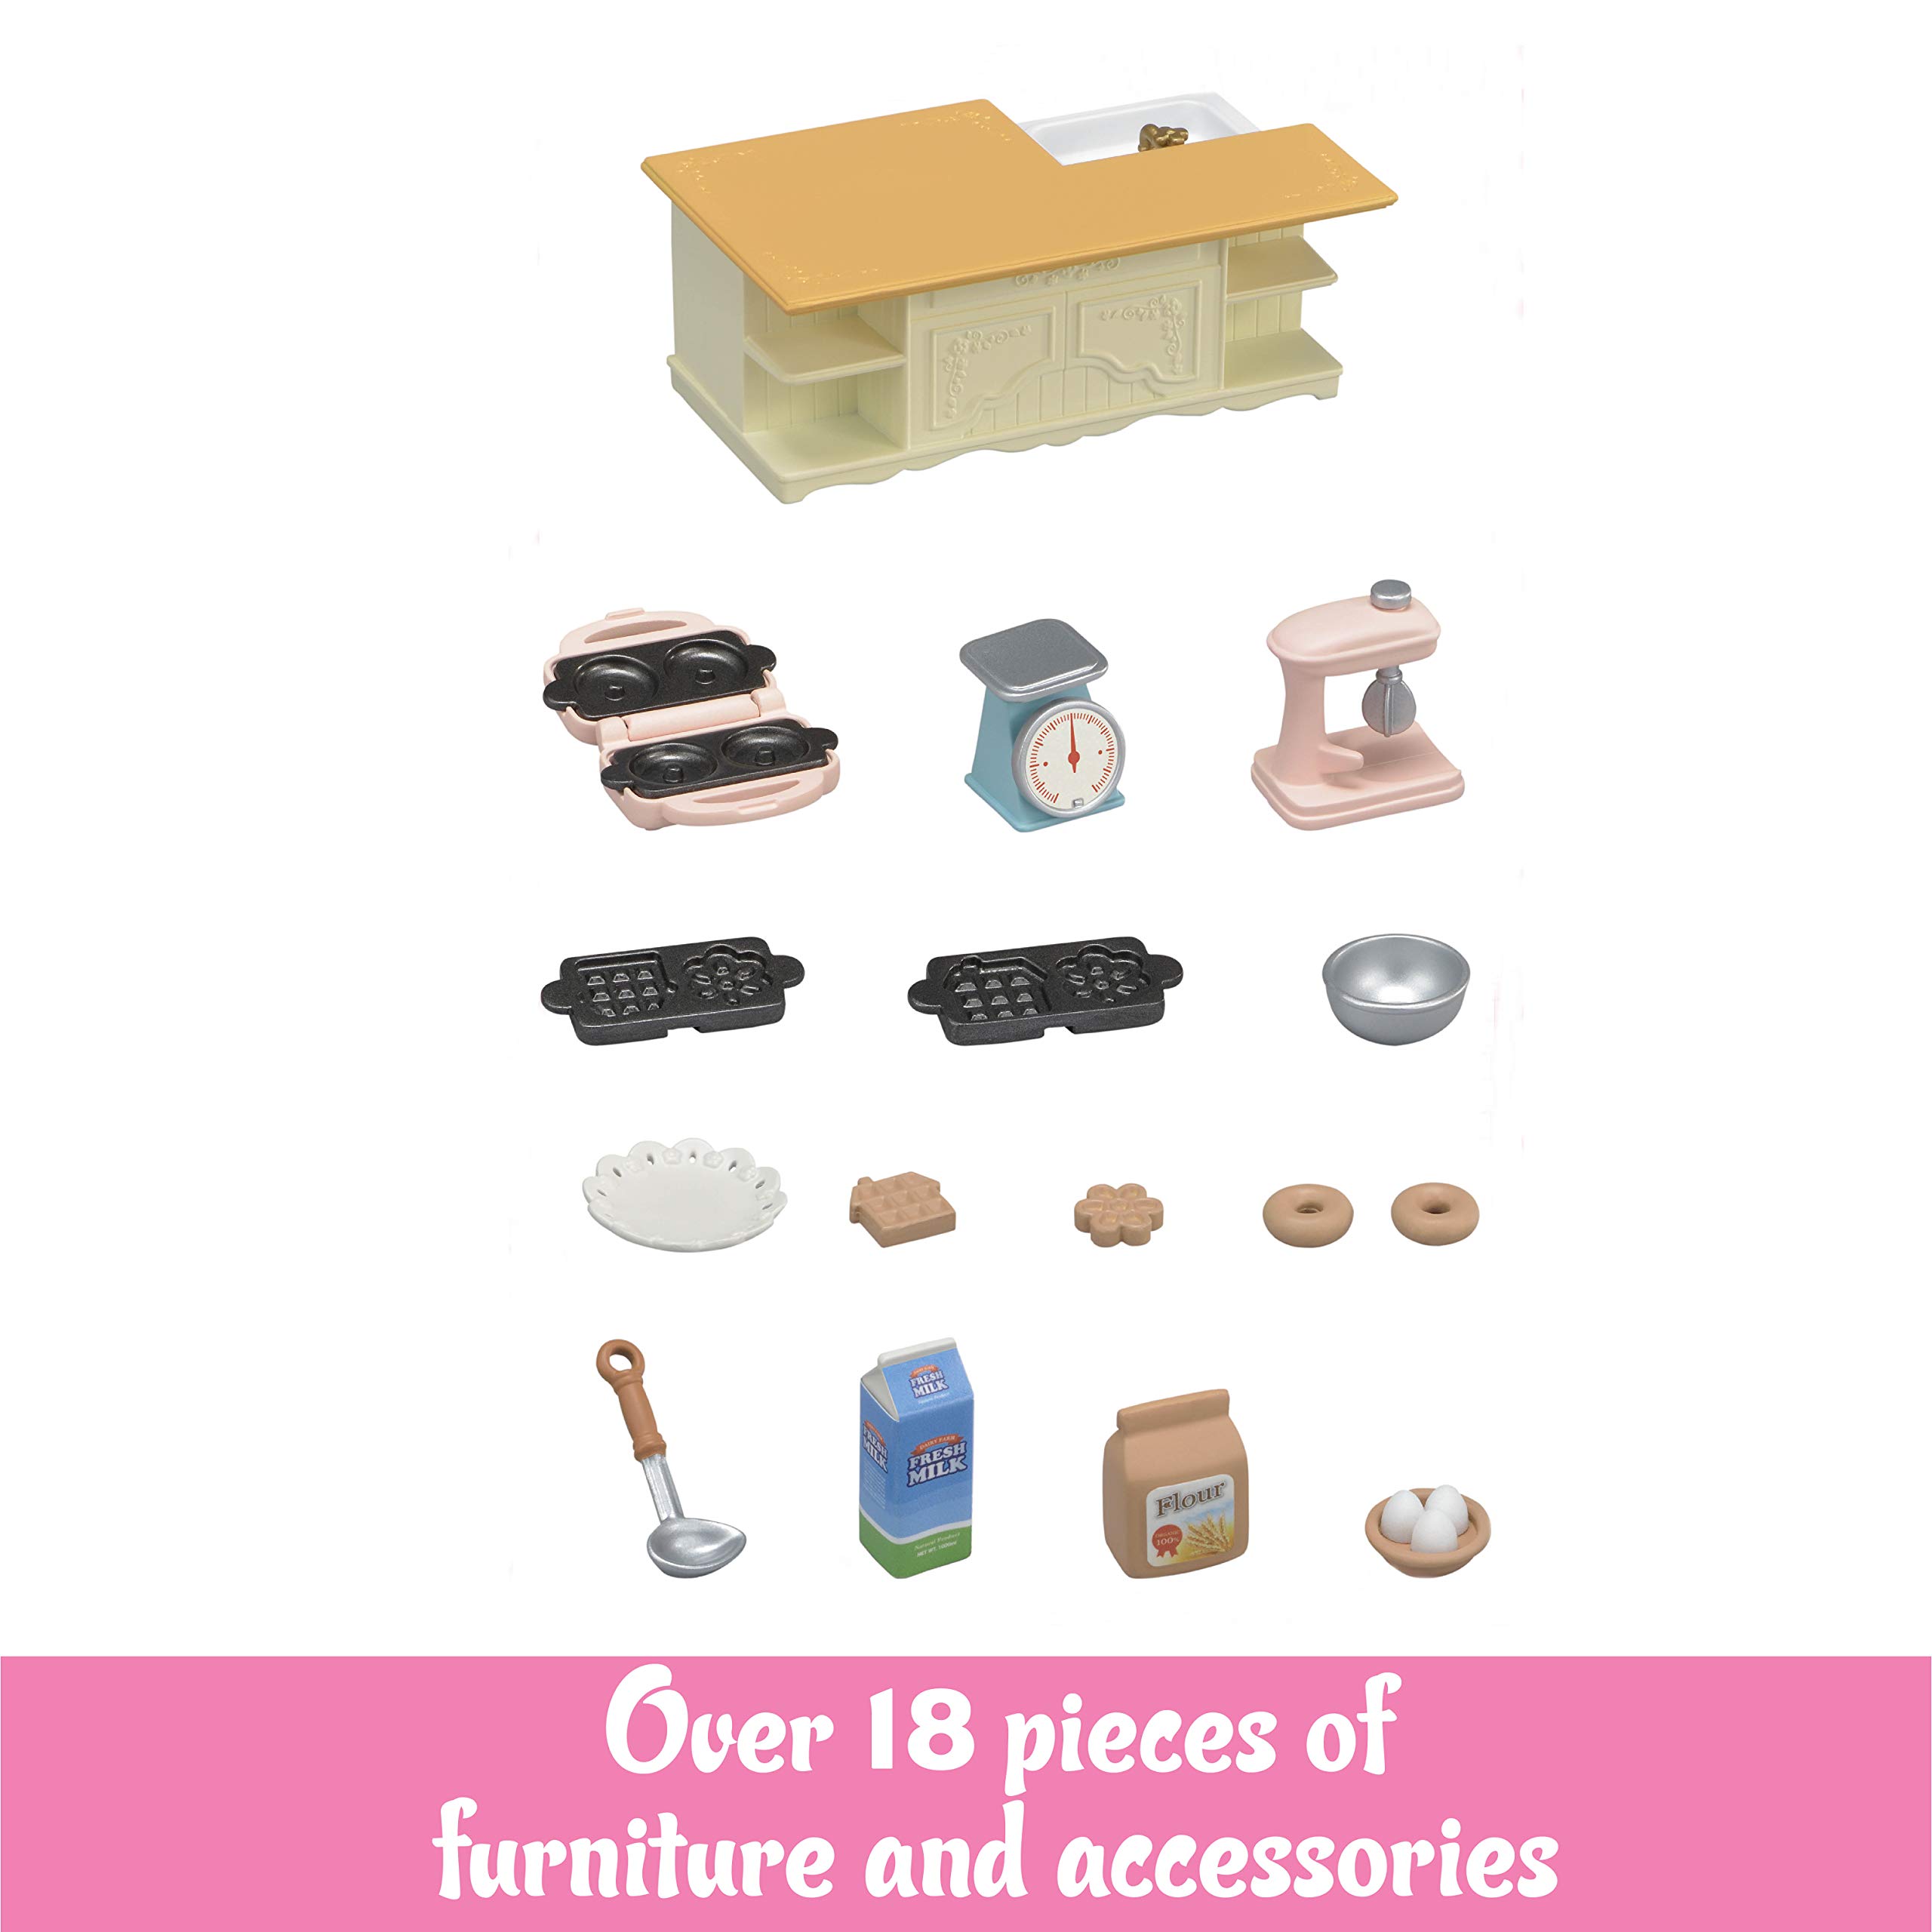 Calico Critters Kitchen Island, Toy Dollhouse Furniture and Accessories Set